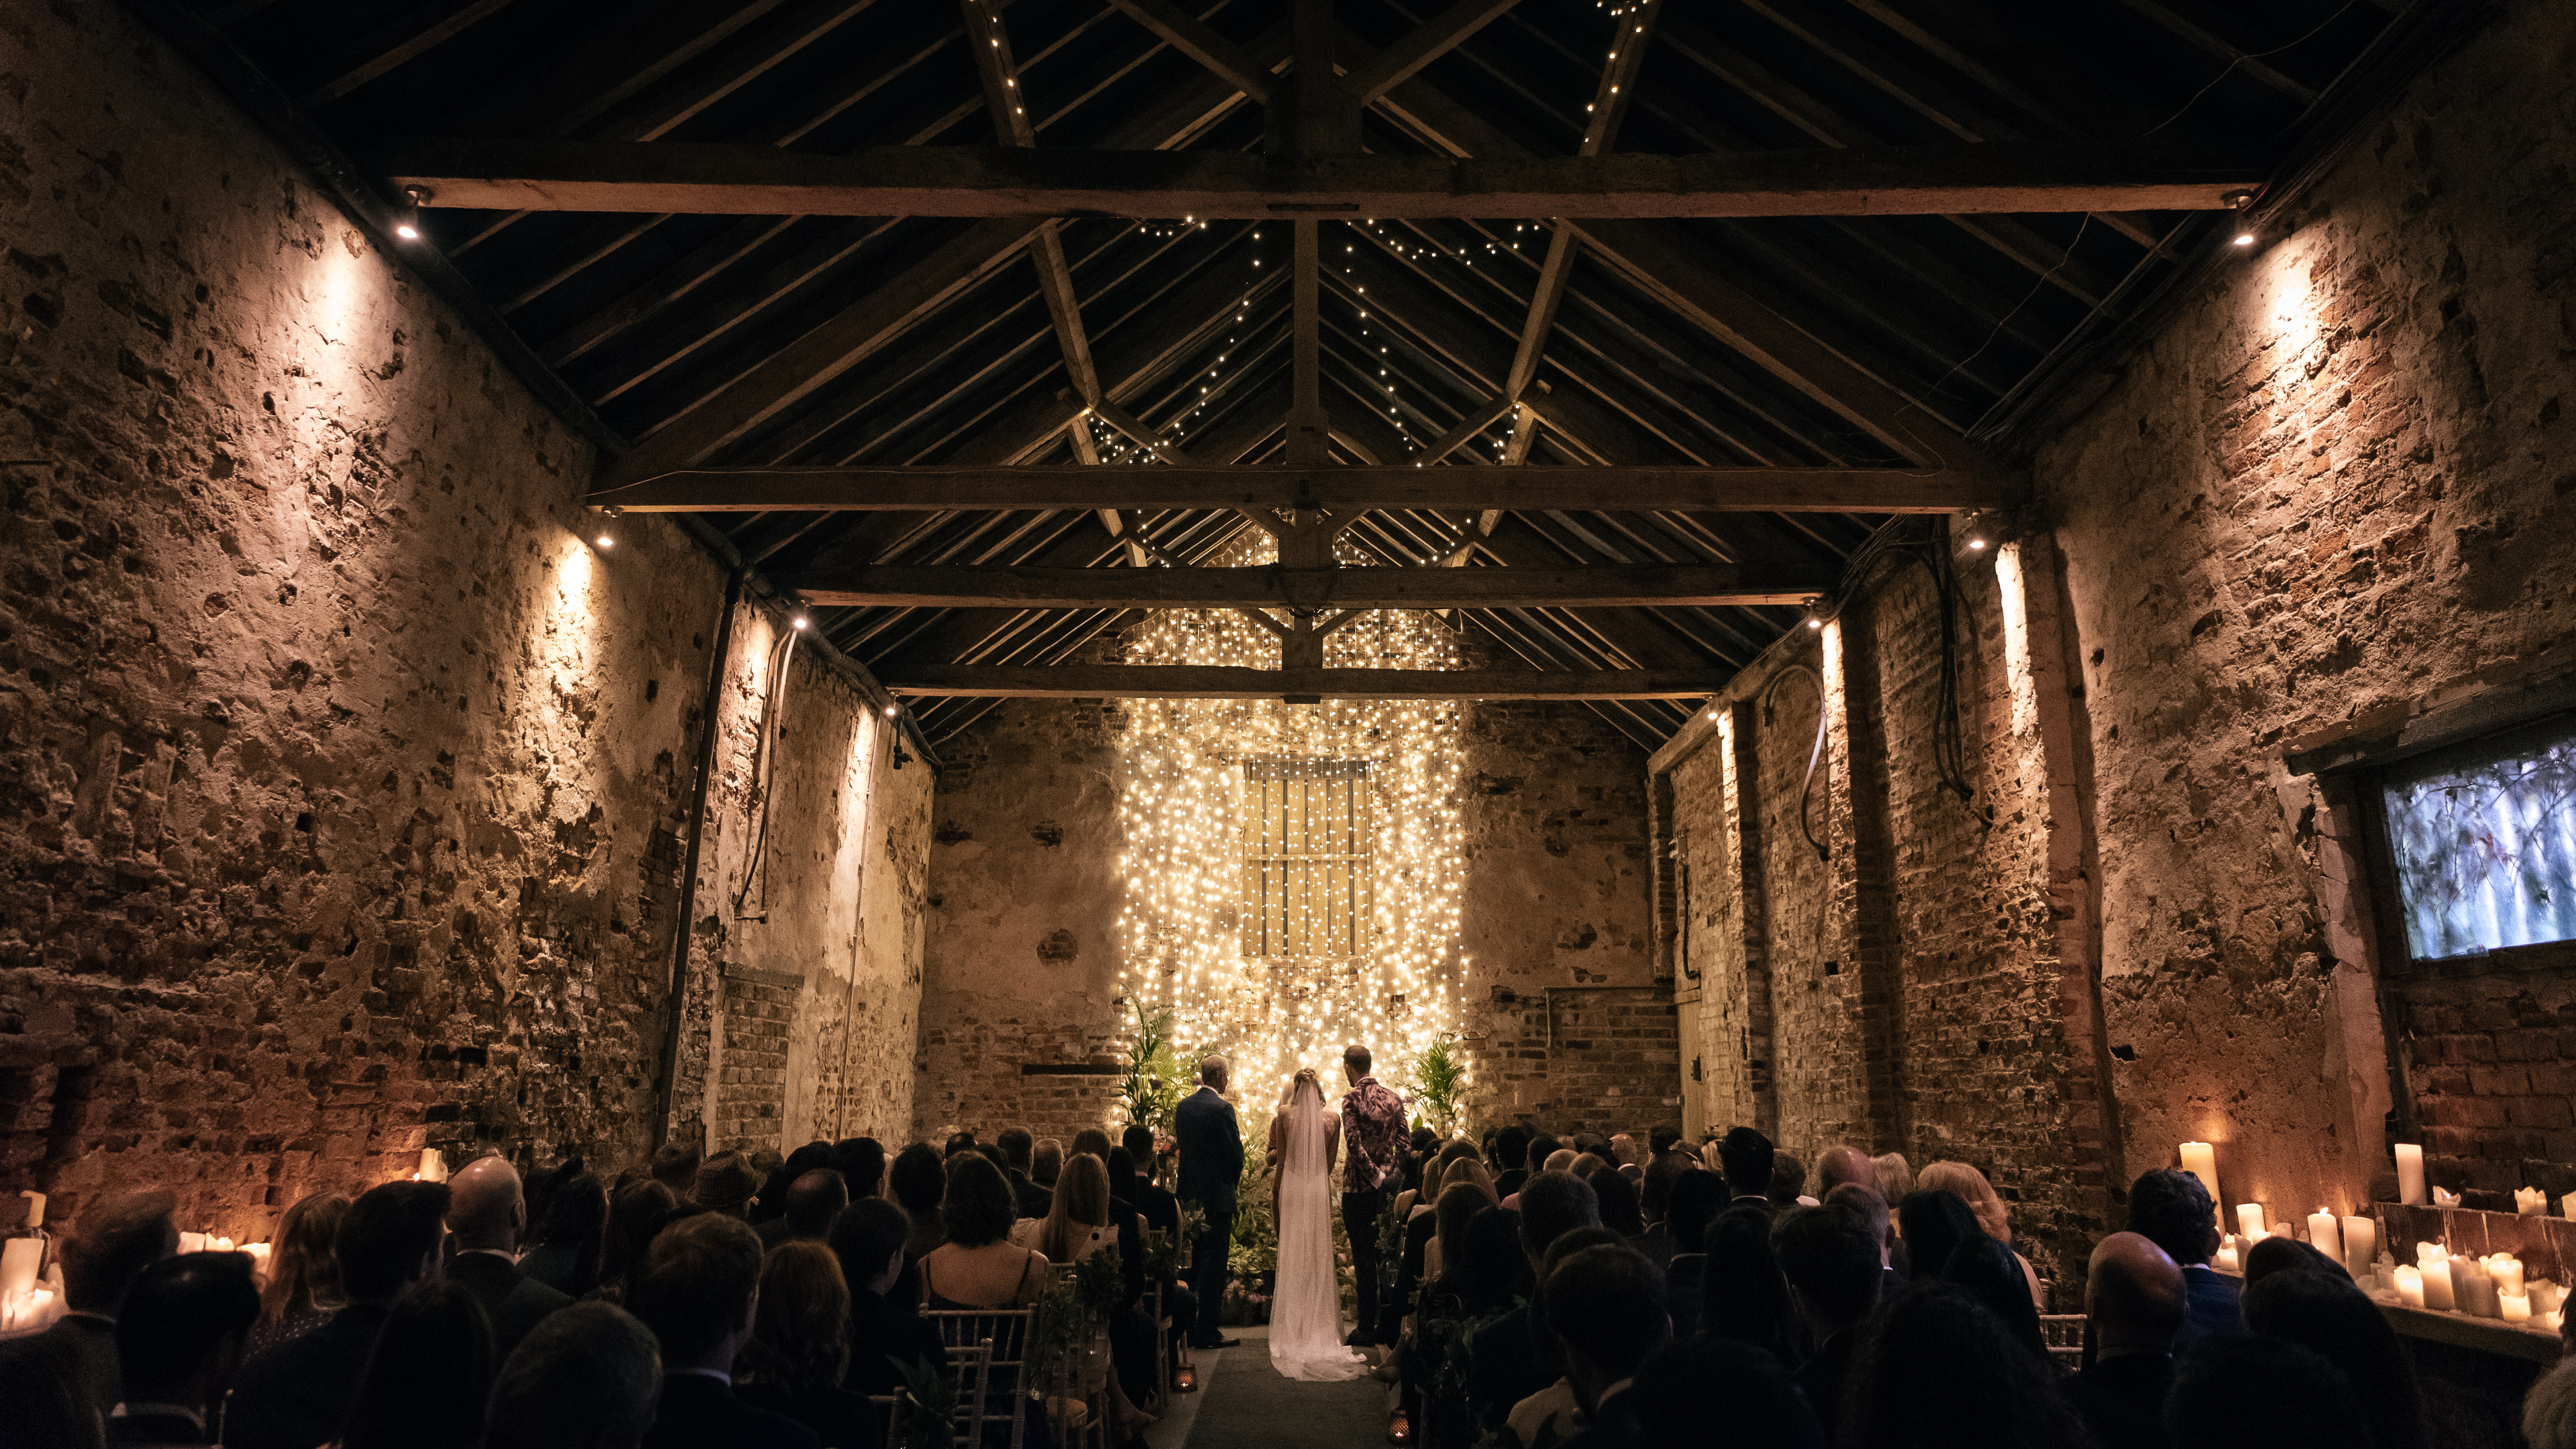 A wedding ceremony happening in a converted old building.